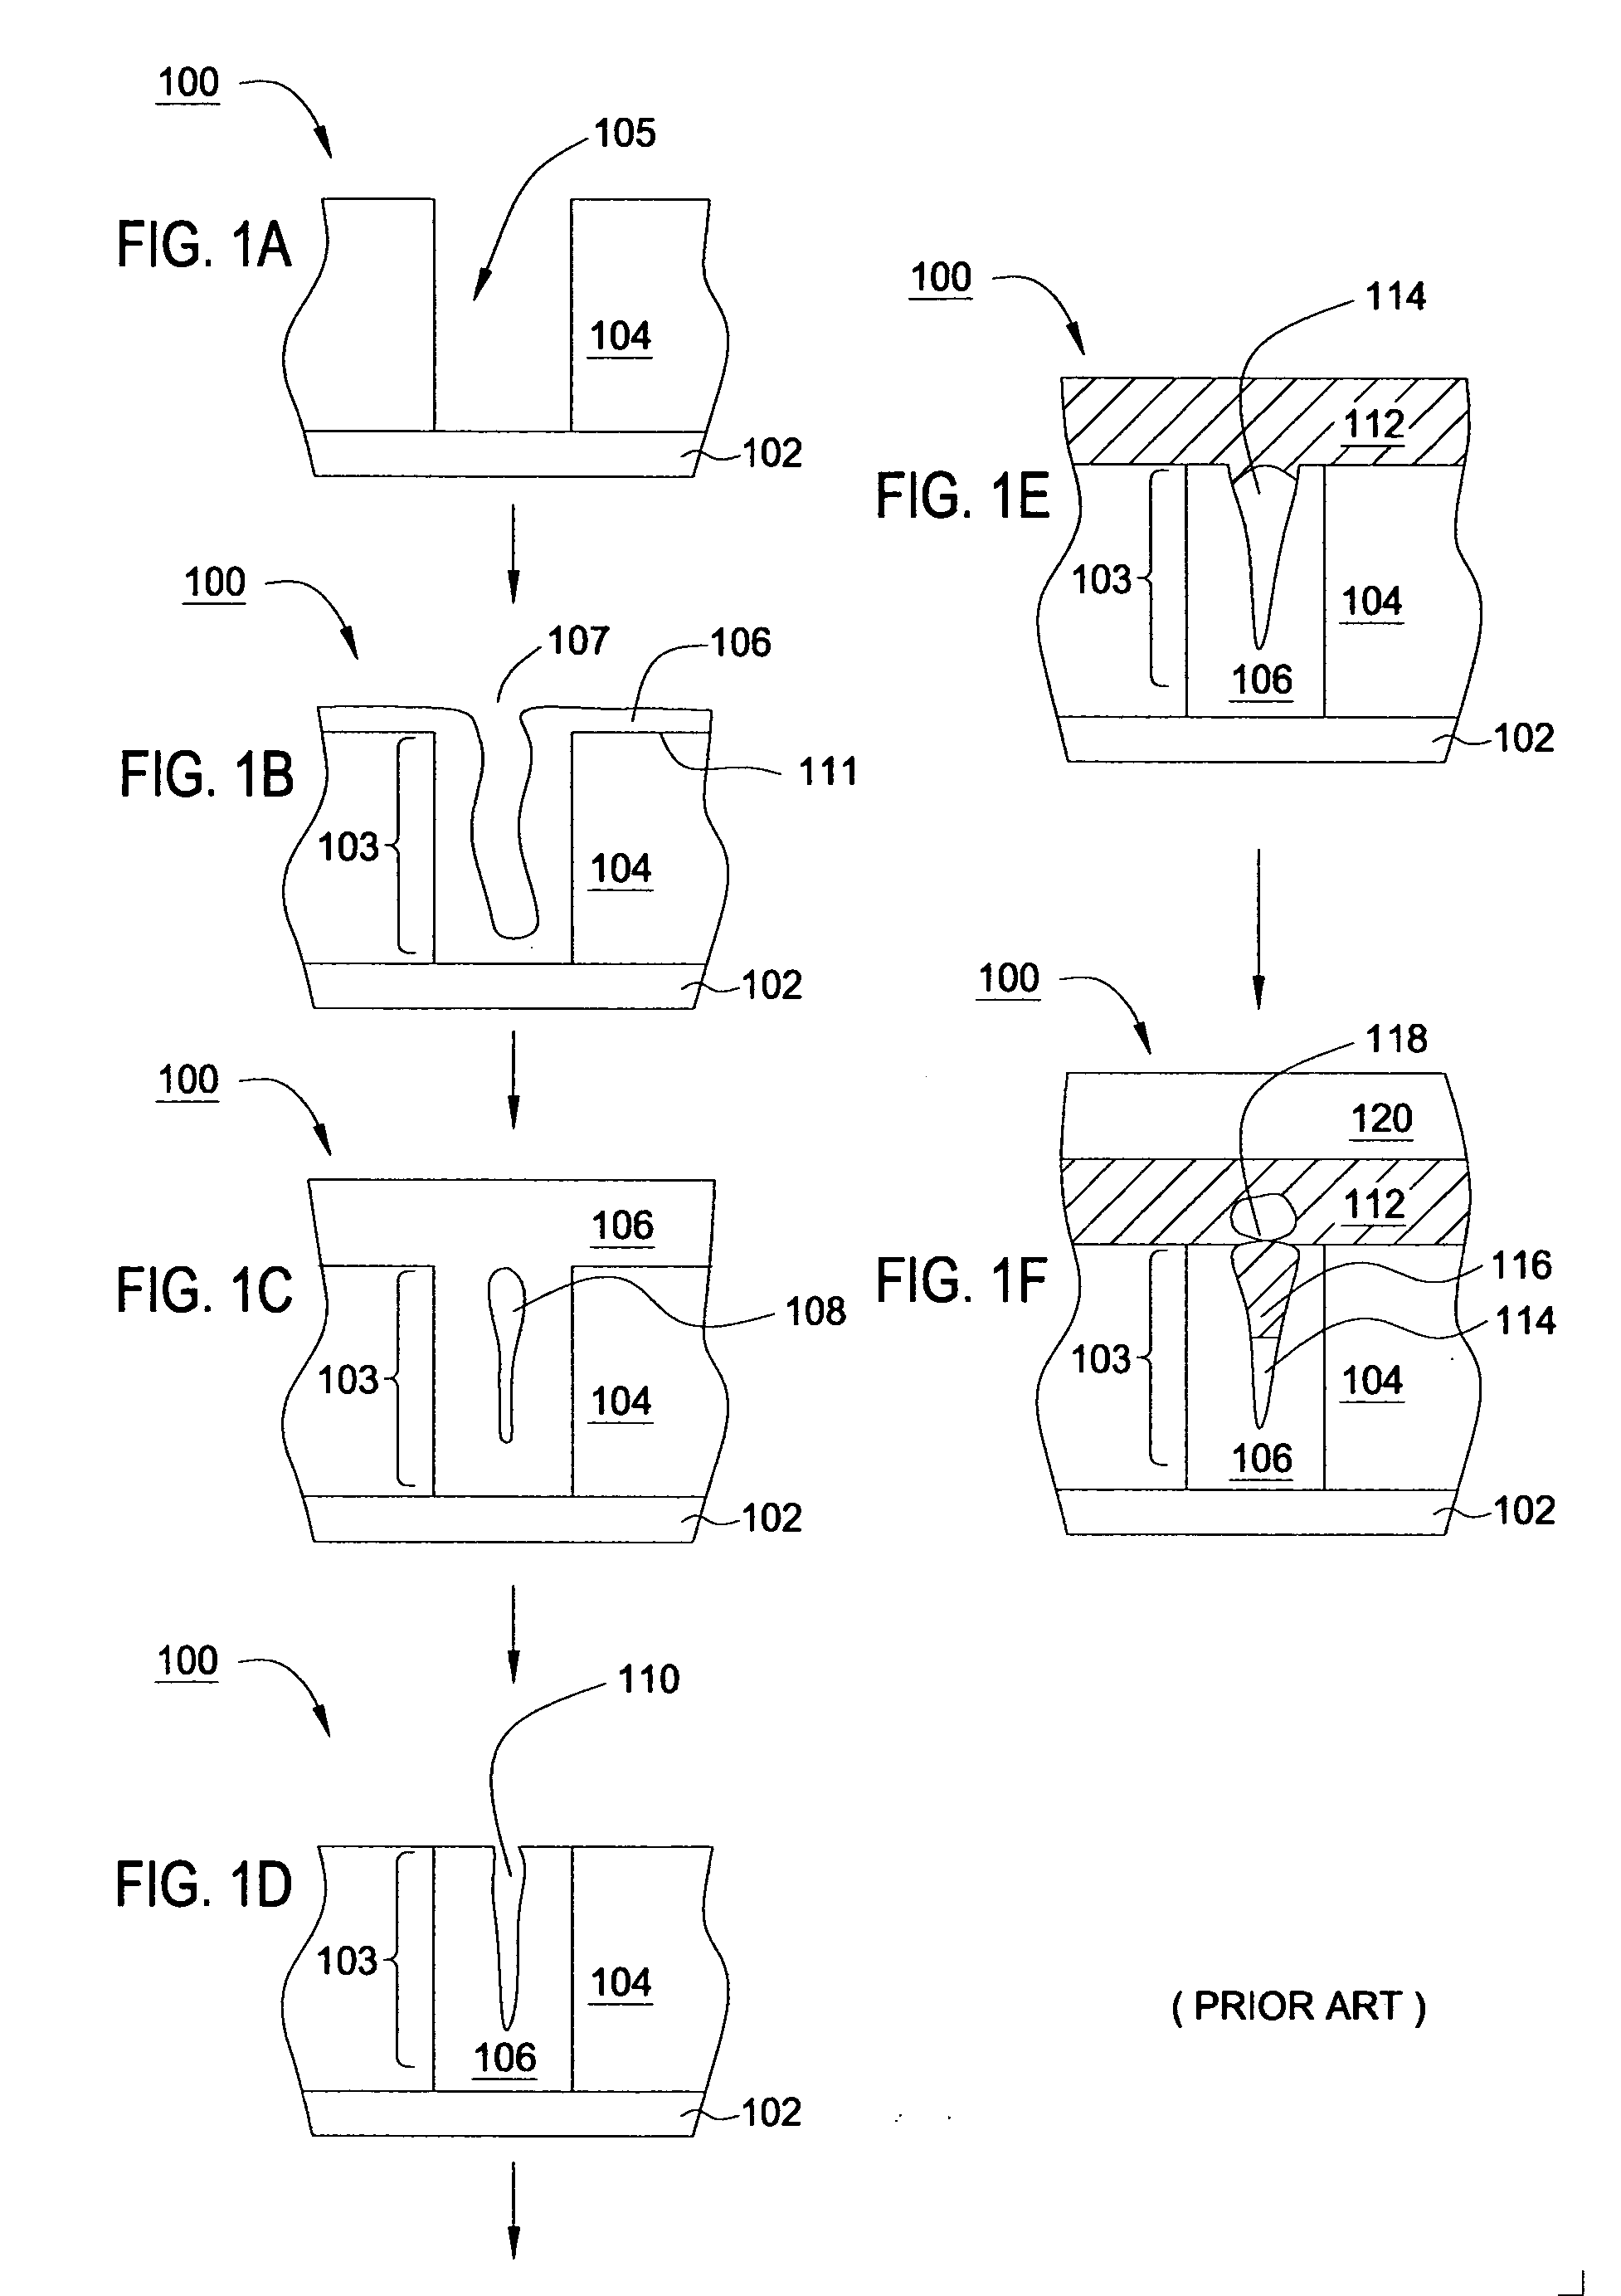 Electroless deposition processes and compositions for forming interconnects